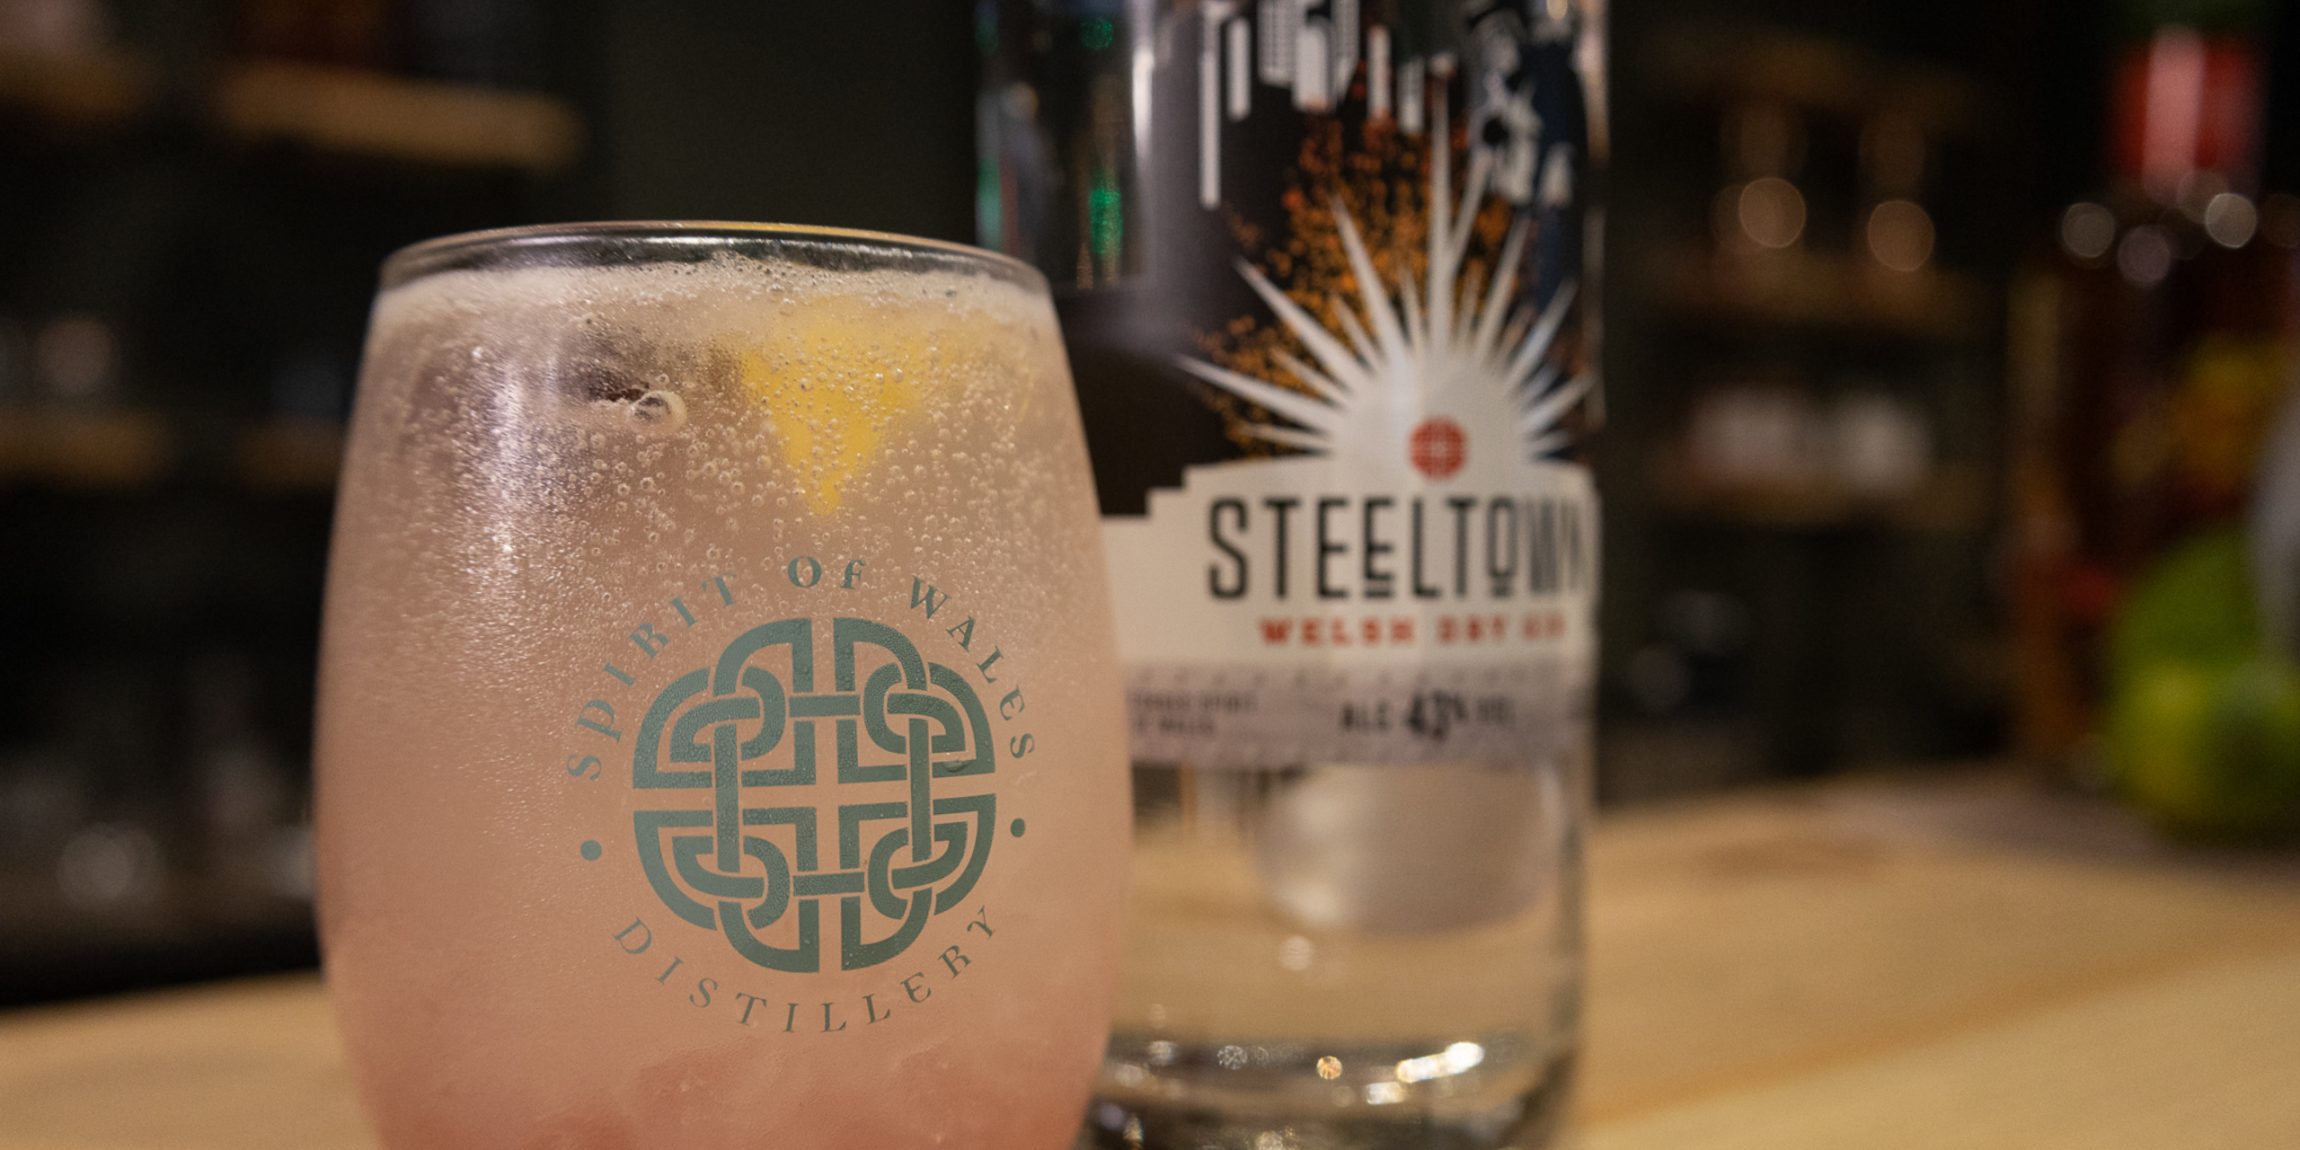 Spirit of Wales Distillery - Tasting Event - Award winning Steeltown Welsh gin one of the tastings at our Virtual tasting events